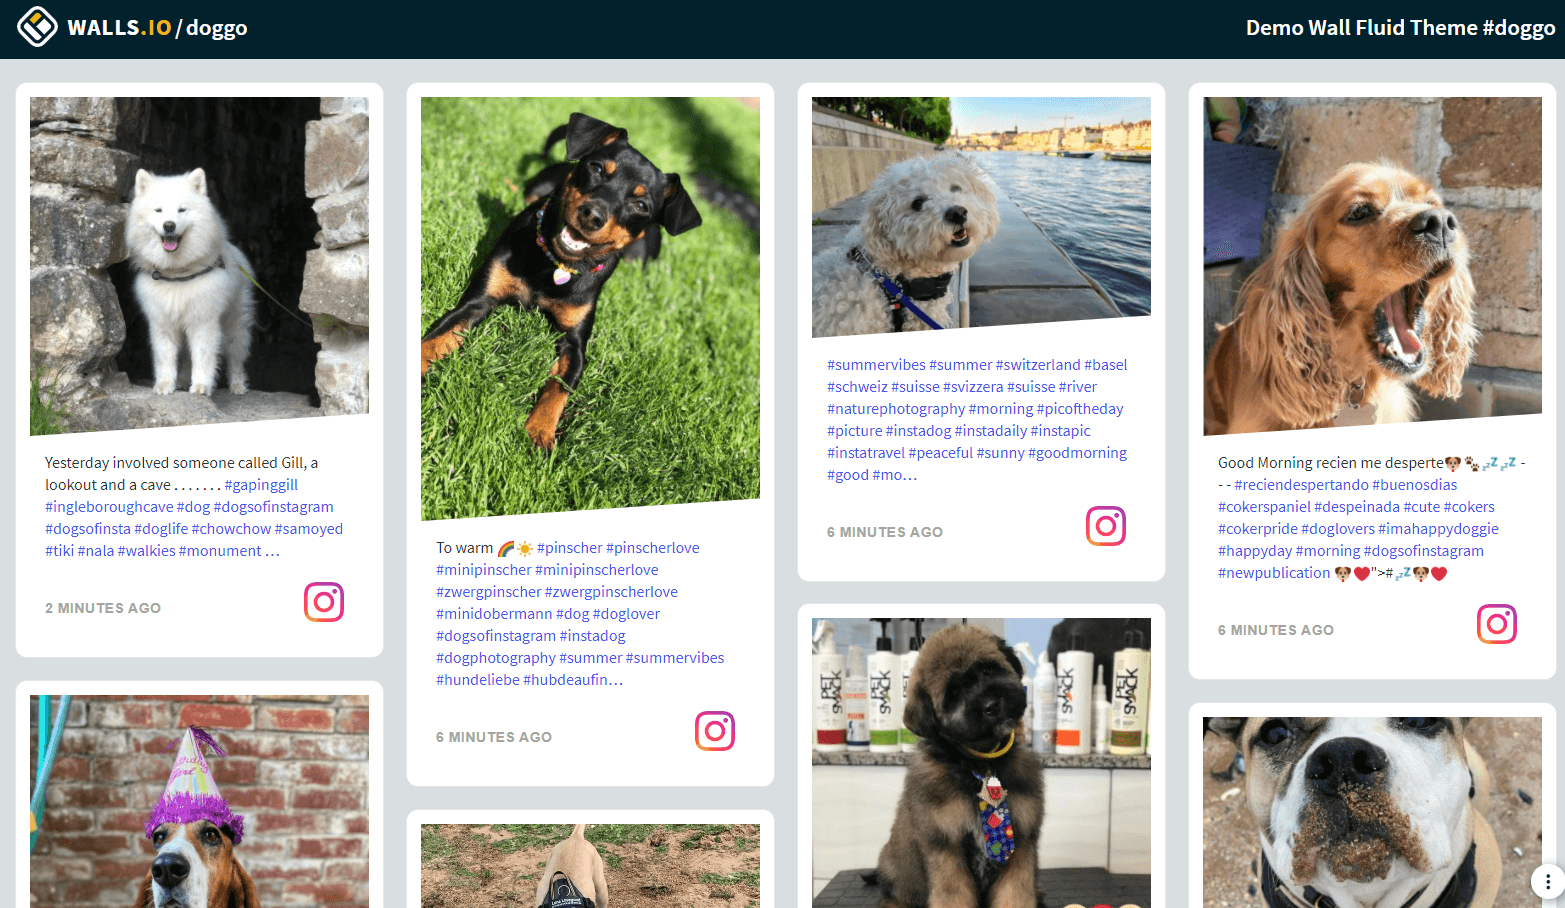 The image showcases a demo of a social media wall with various Instagram posts of dogs, each post featuring an image and captions with hashtags, designed to demonstrate the wall's layout and functionality for embedding on websites.